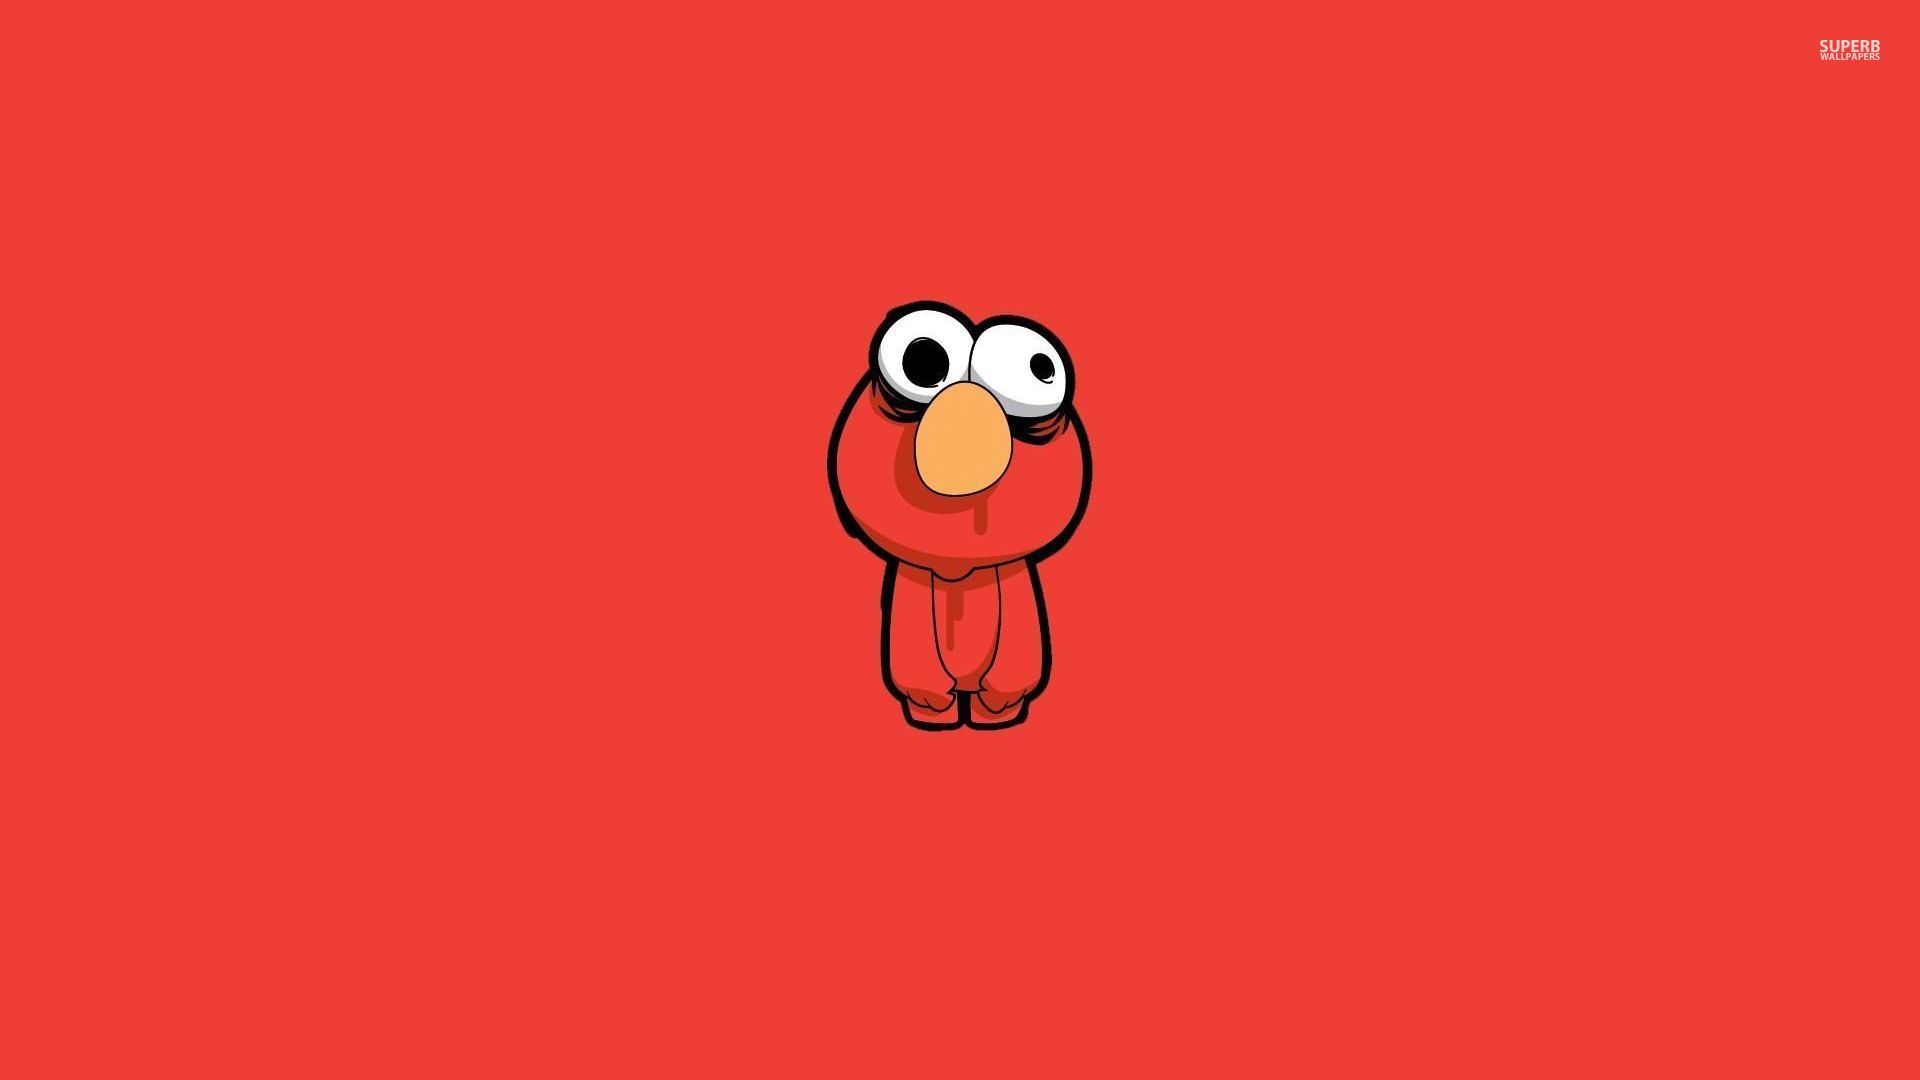 Zombie Elmo wallpaper - Funny wallpapers - #29496